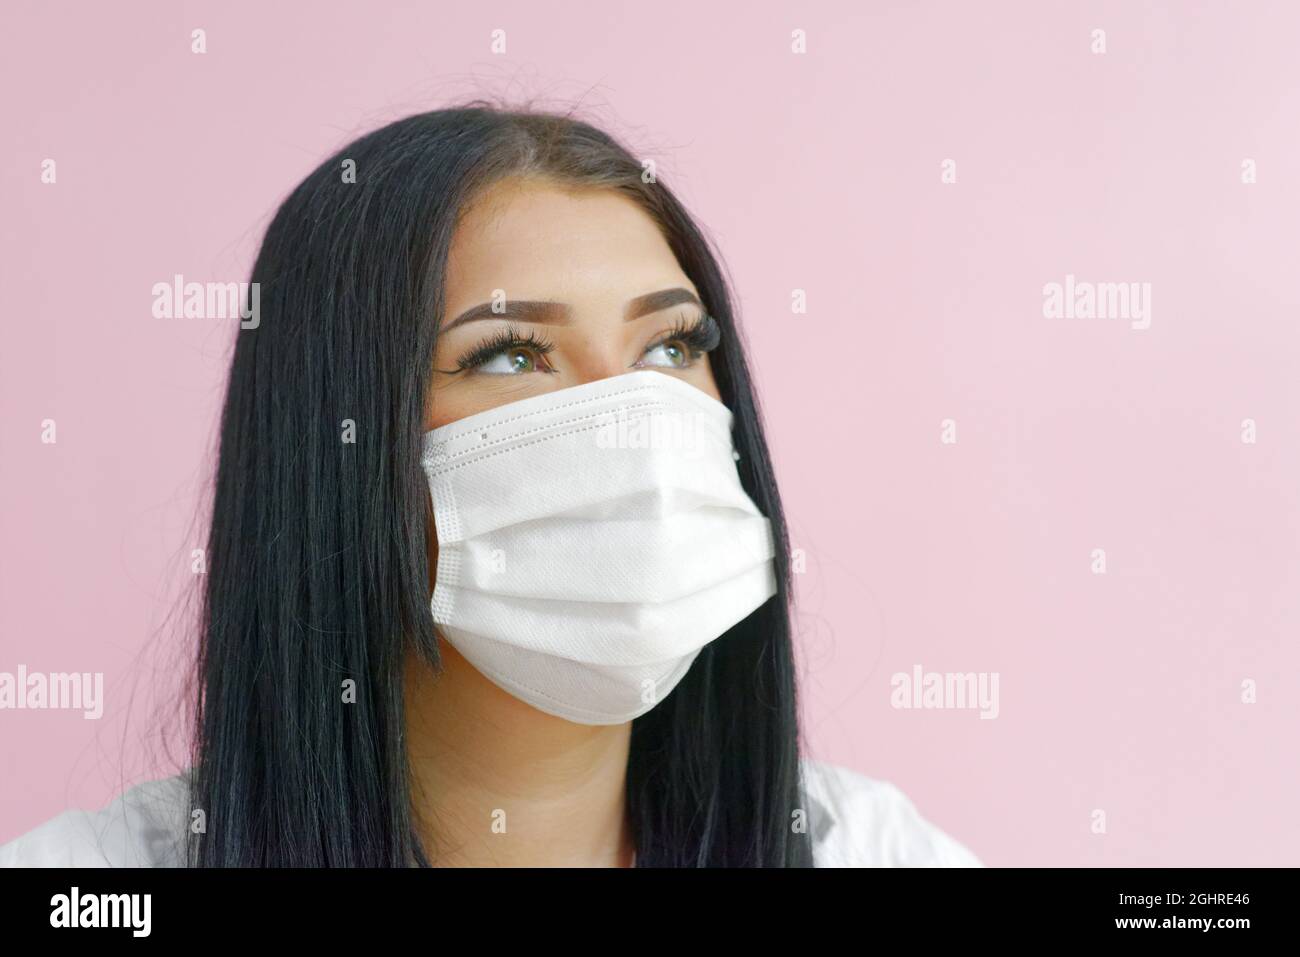 Girl with black hair and a mask on a pink background Stock Photo